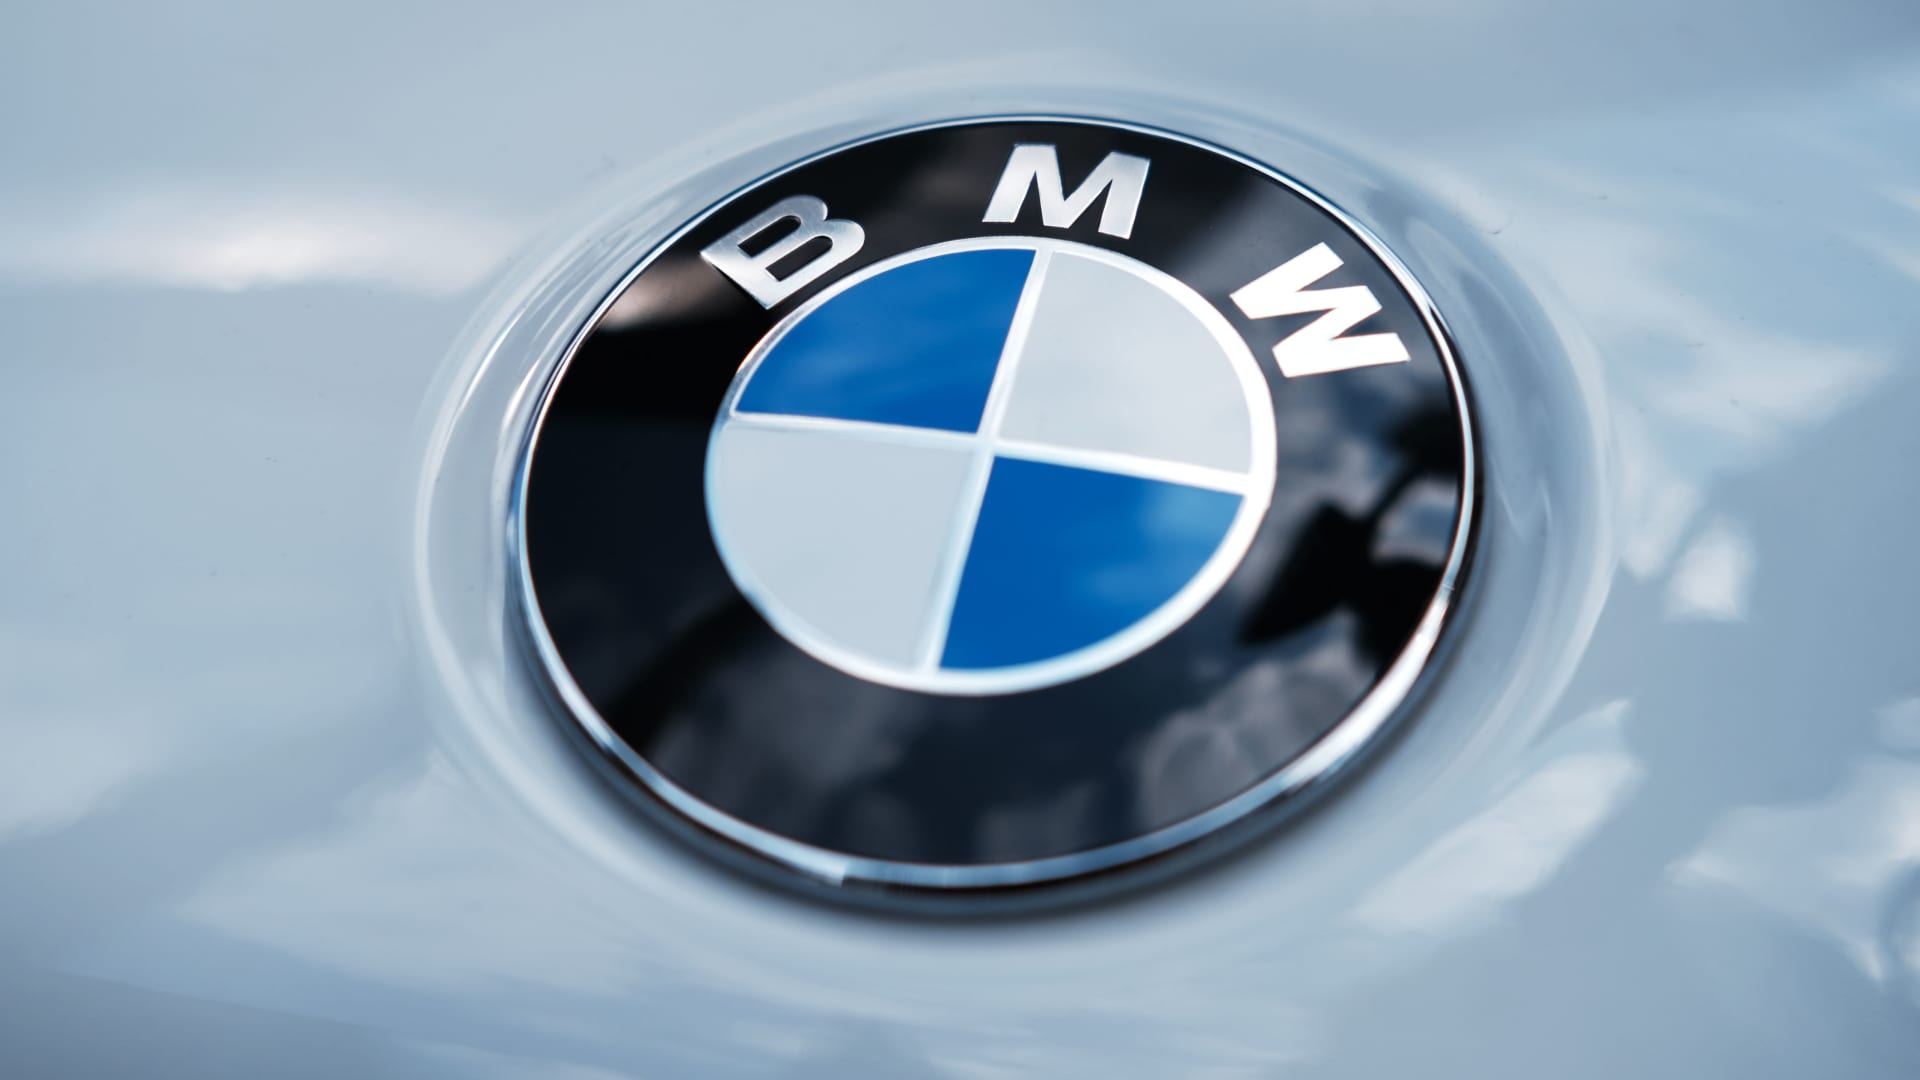 BMW says 2021 profit surged as it favored higher-margin vehicles